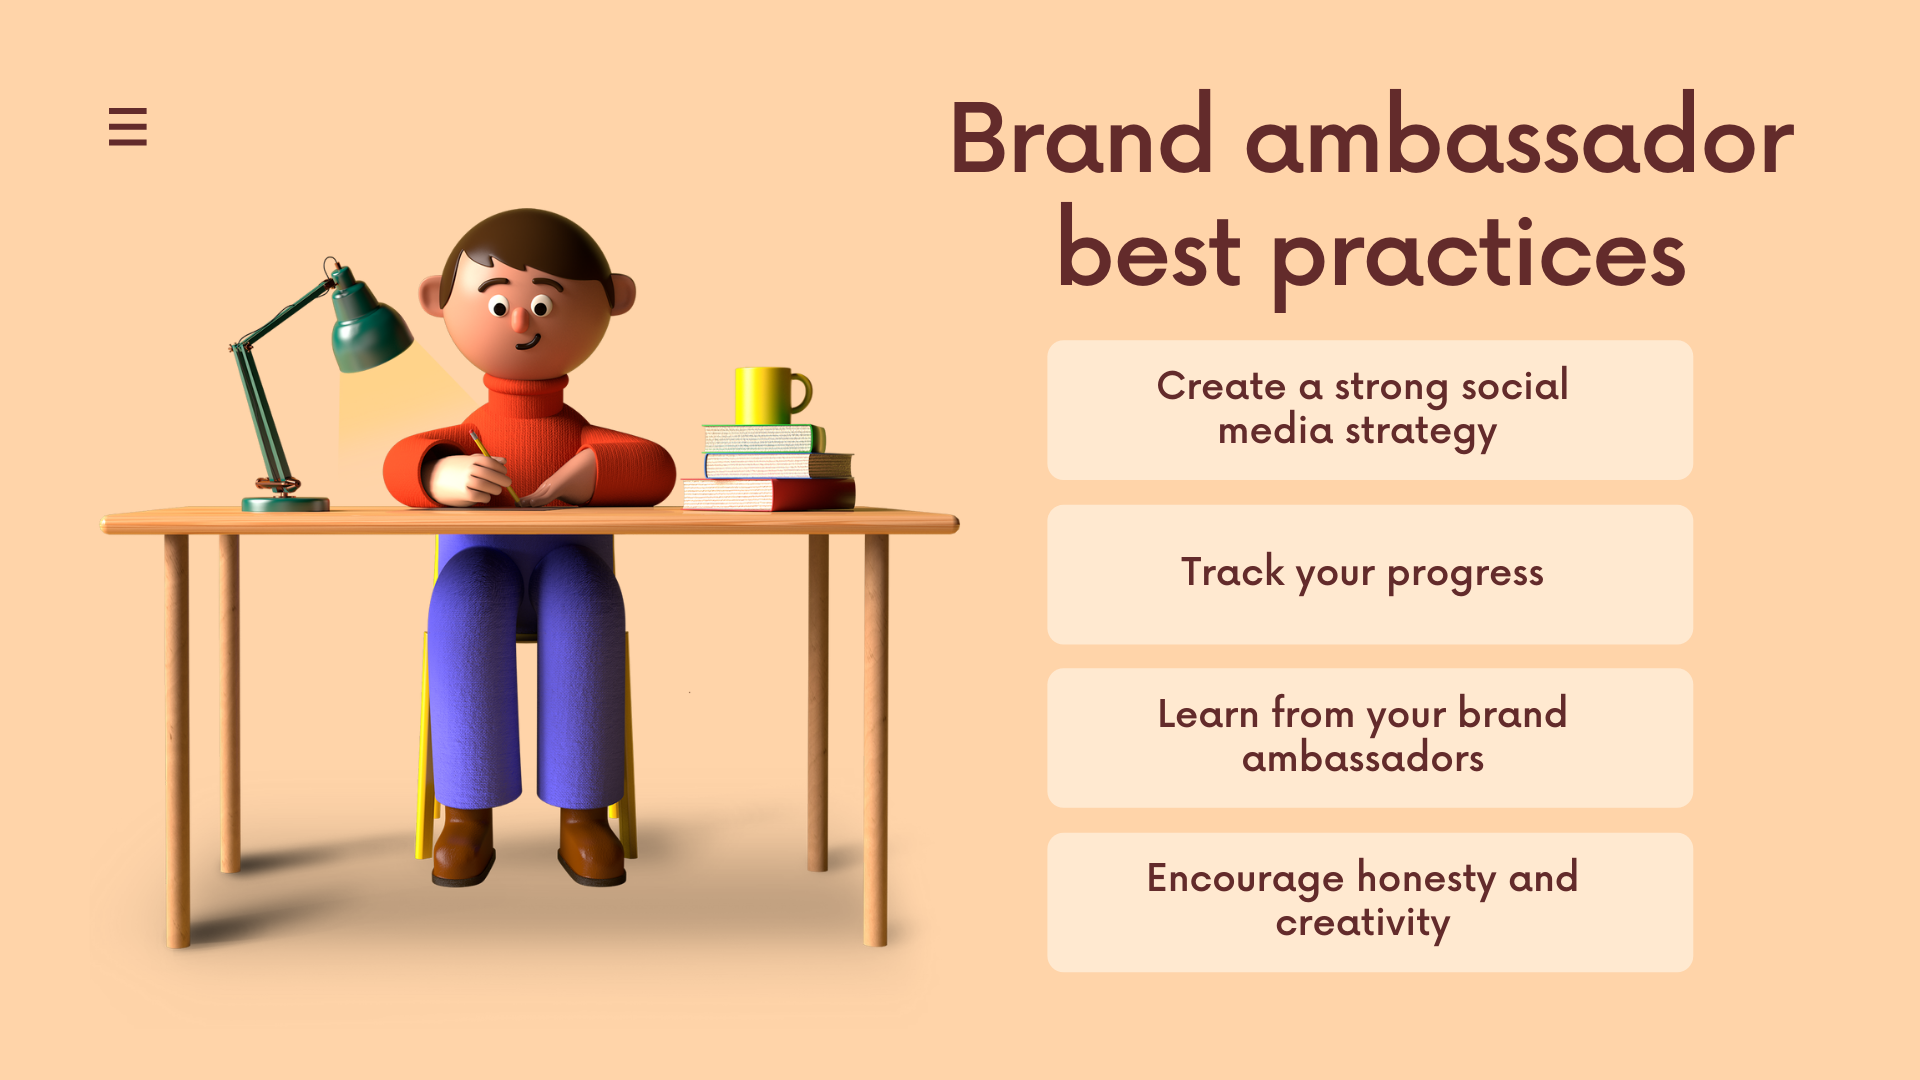 7 Must Have Characteristics of a Corporate Brand Ambassador